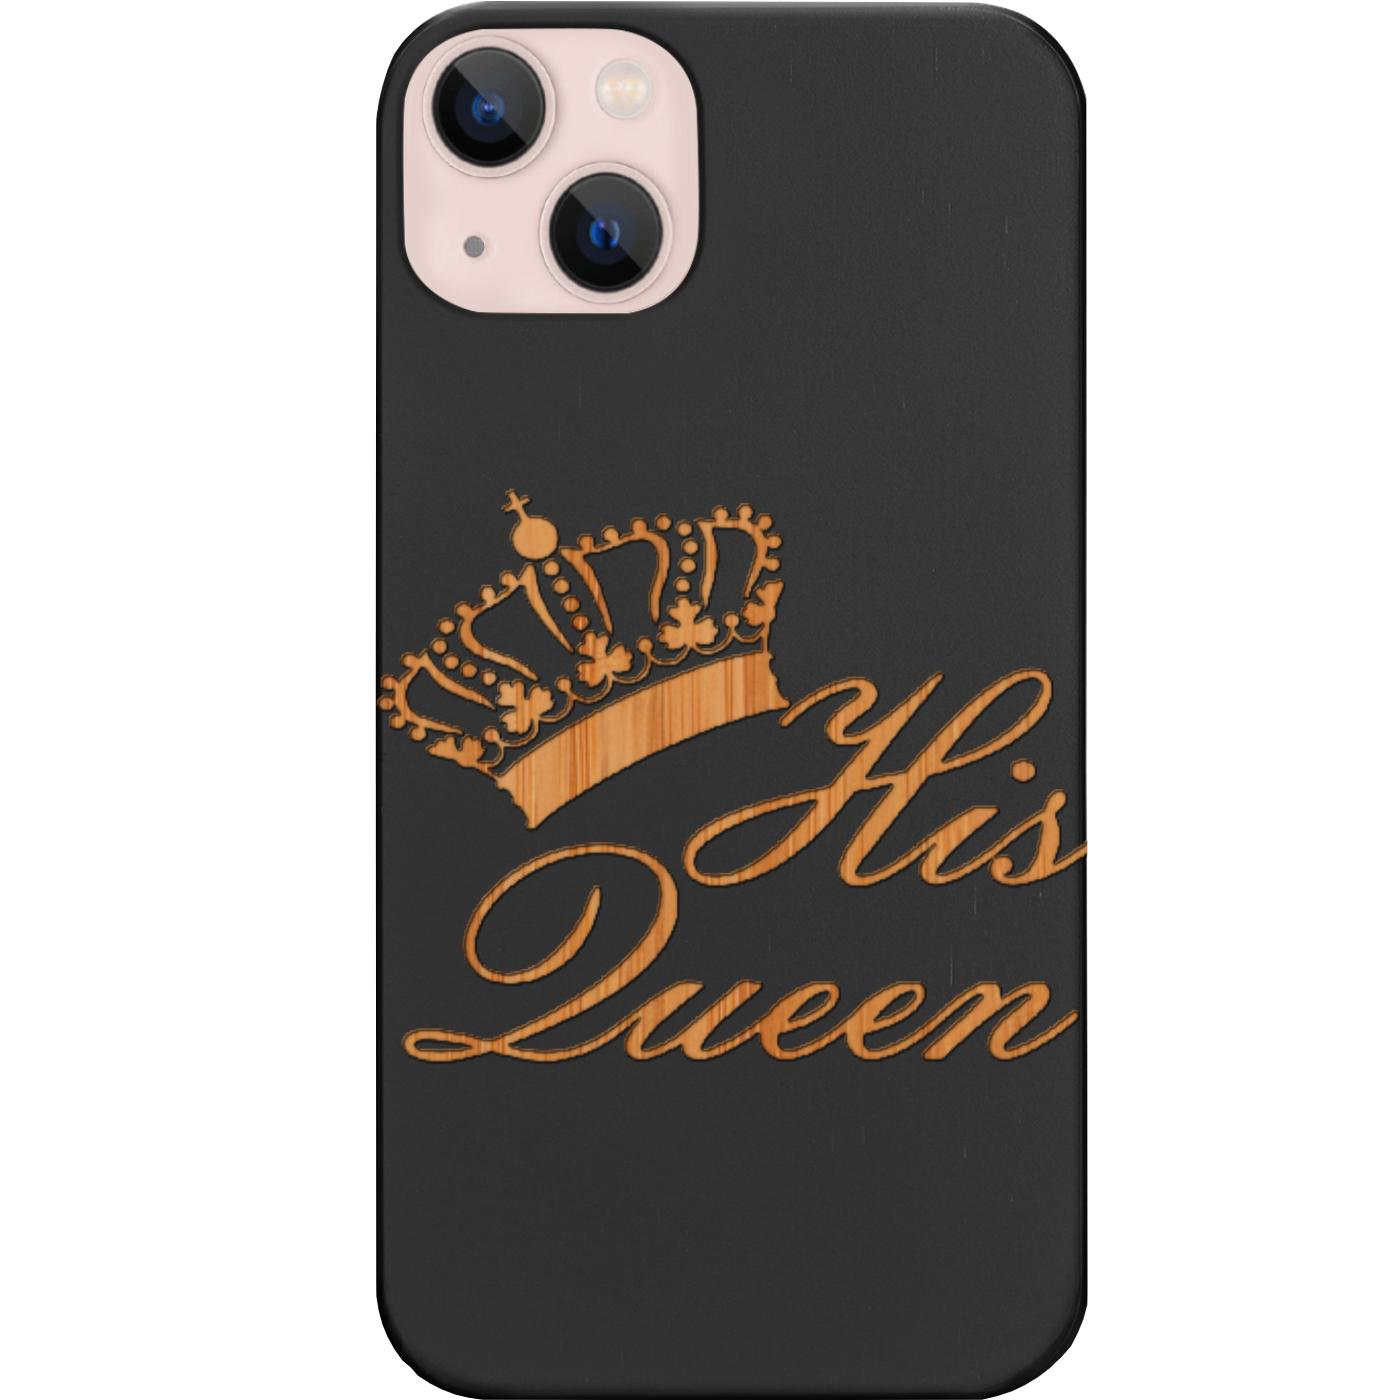 His Queen - Engraved Phone Case